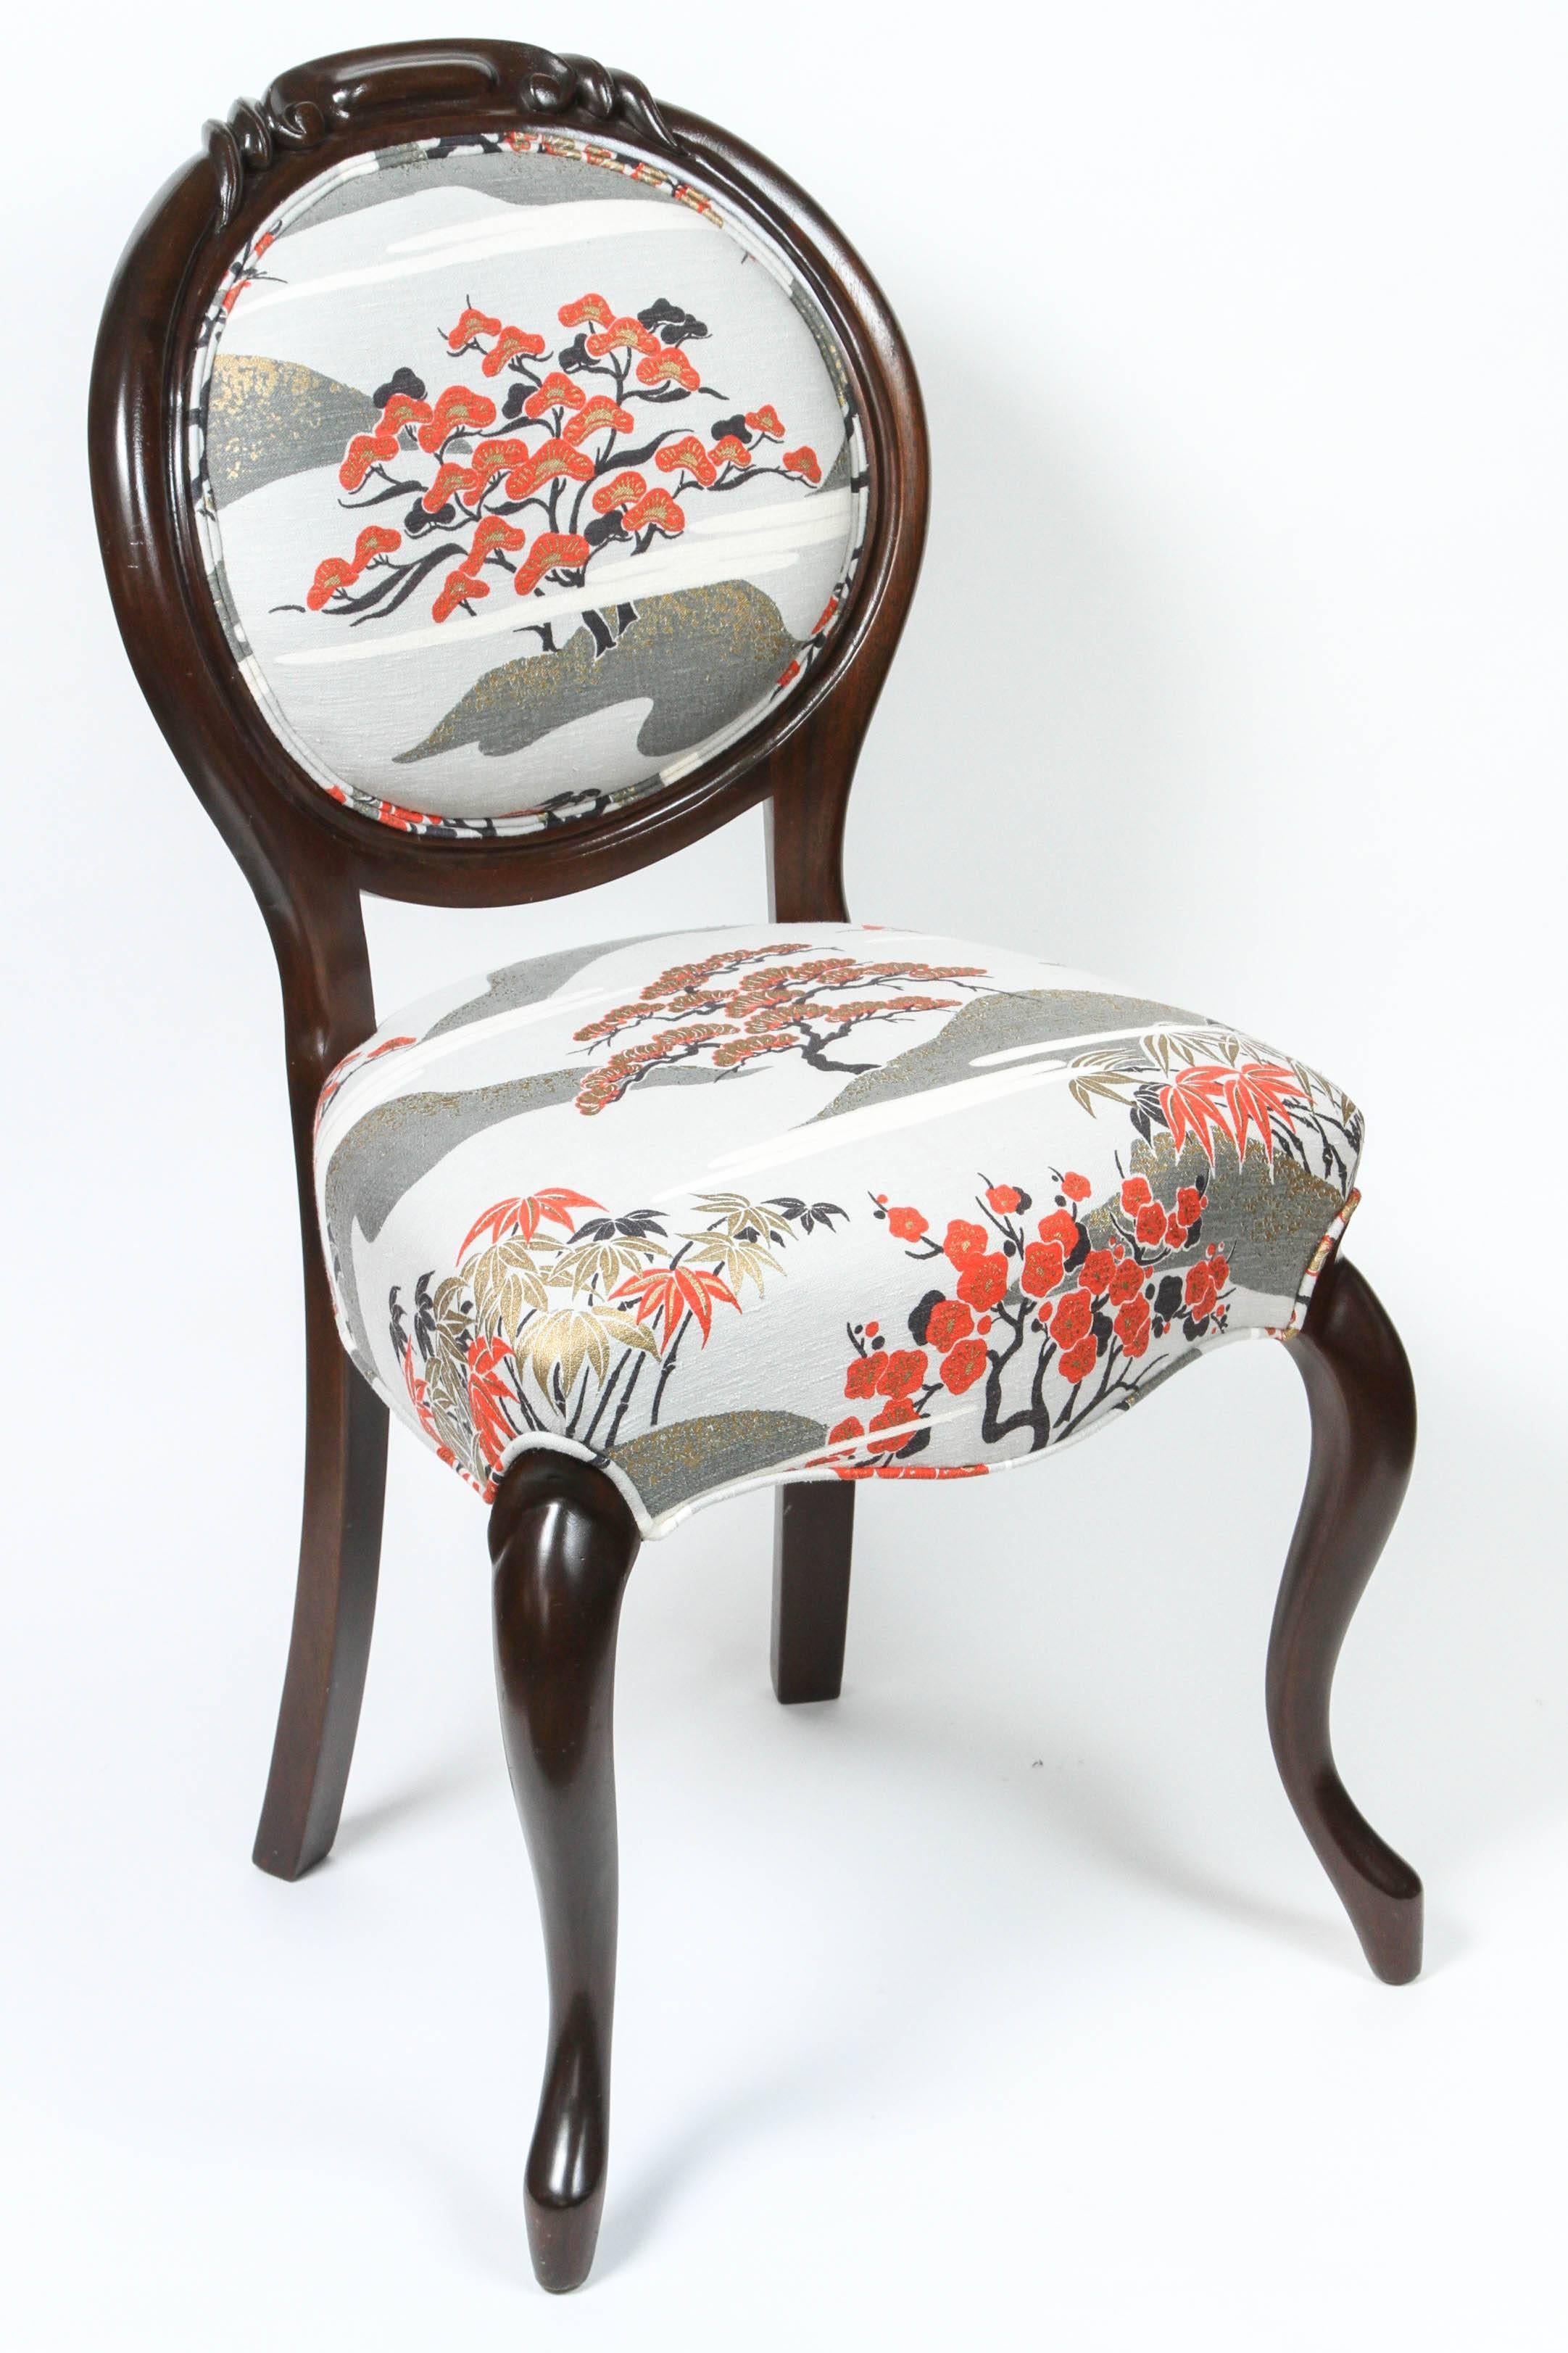 Newly refinished walnut framed Victorian side chair upholstered in Japanese motif cotton fabric.